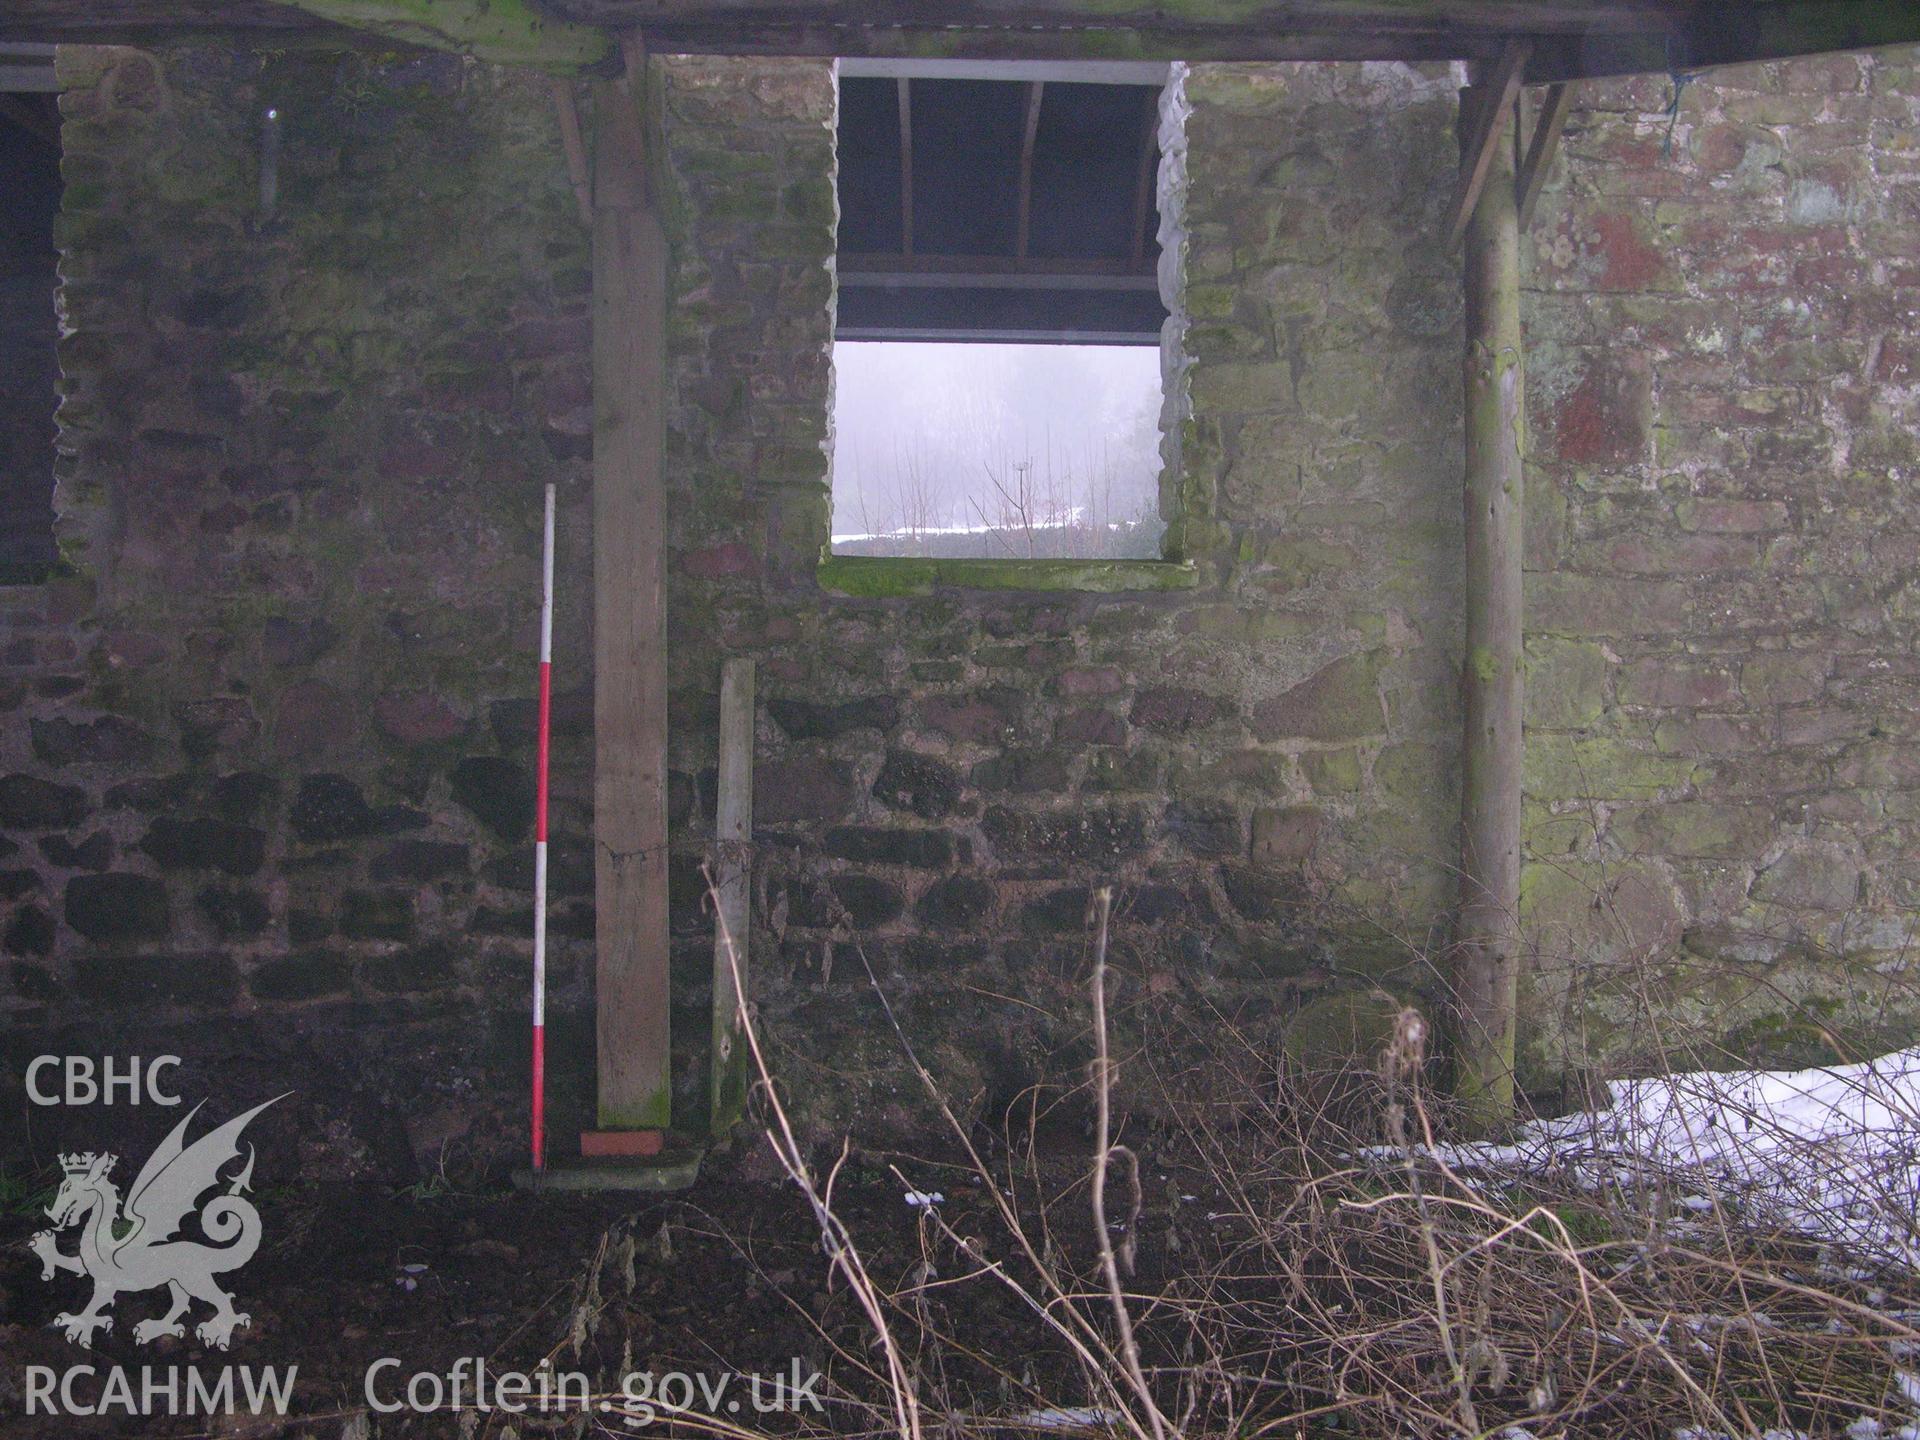 Digital photograph of an interior barn wall, from an Archaeological Building Recording of Hillside Barn, Llanvaches, Monmouthshire, which was conducted by Cambrian Archaeological Projects.